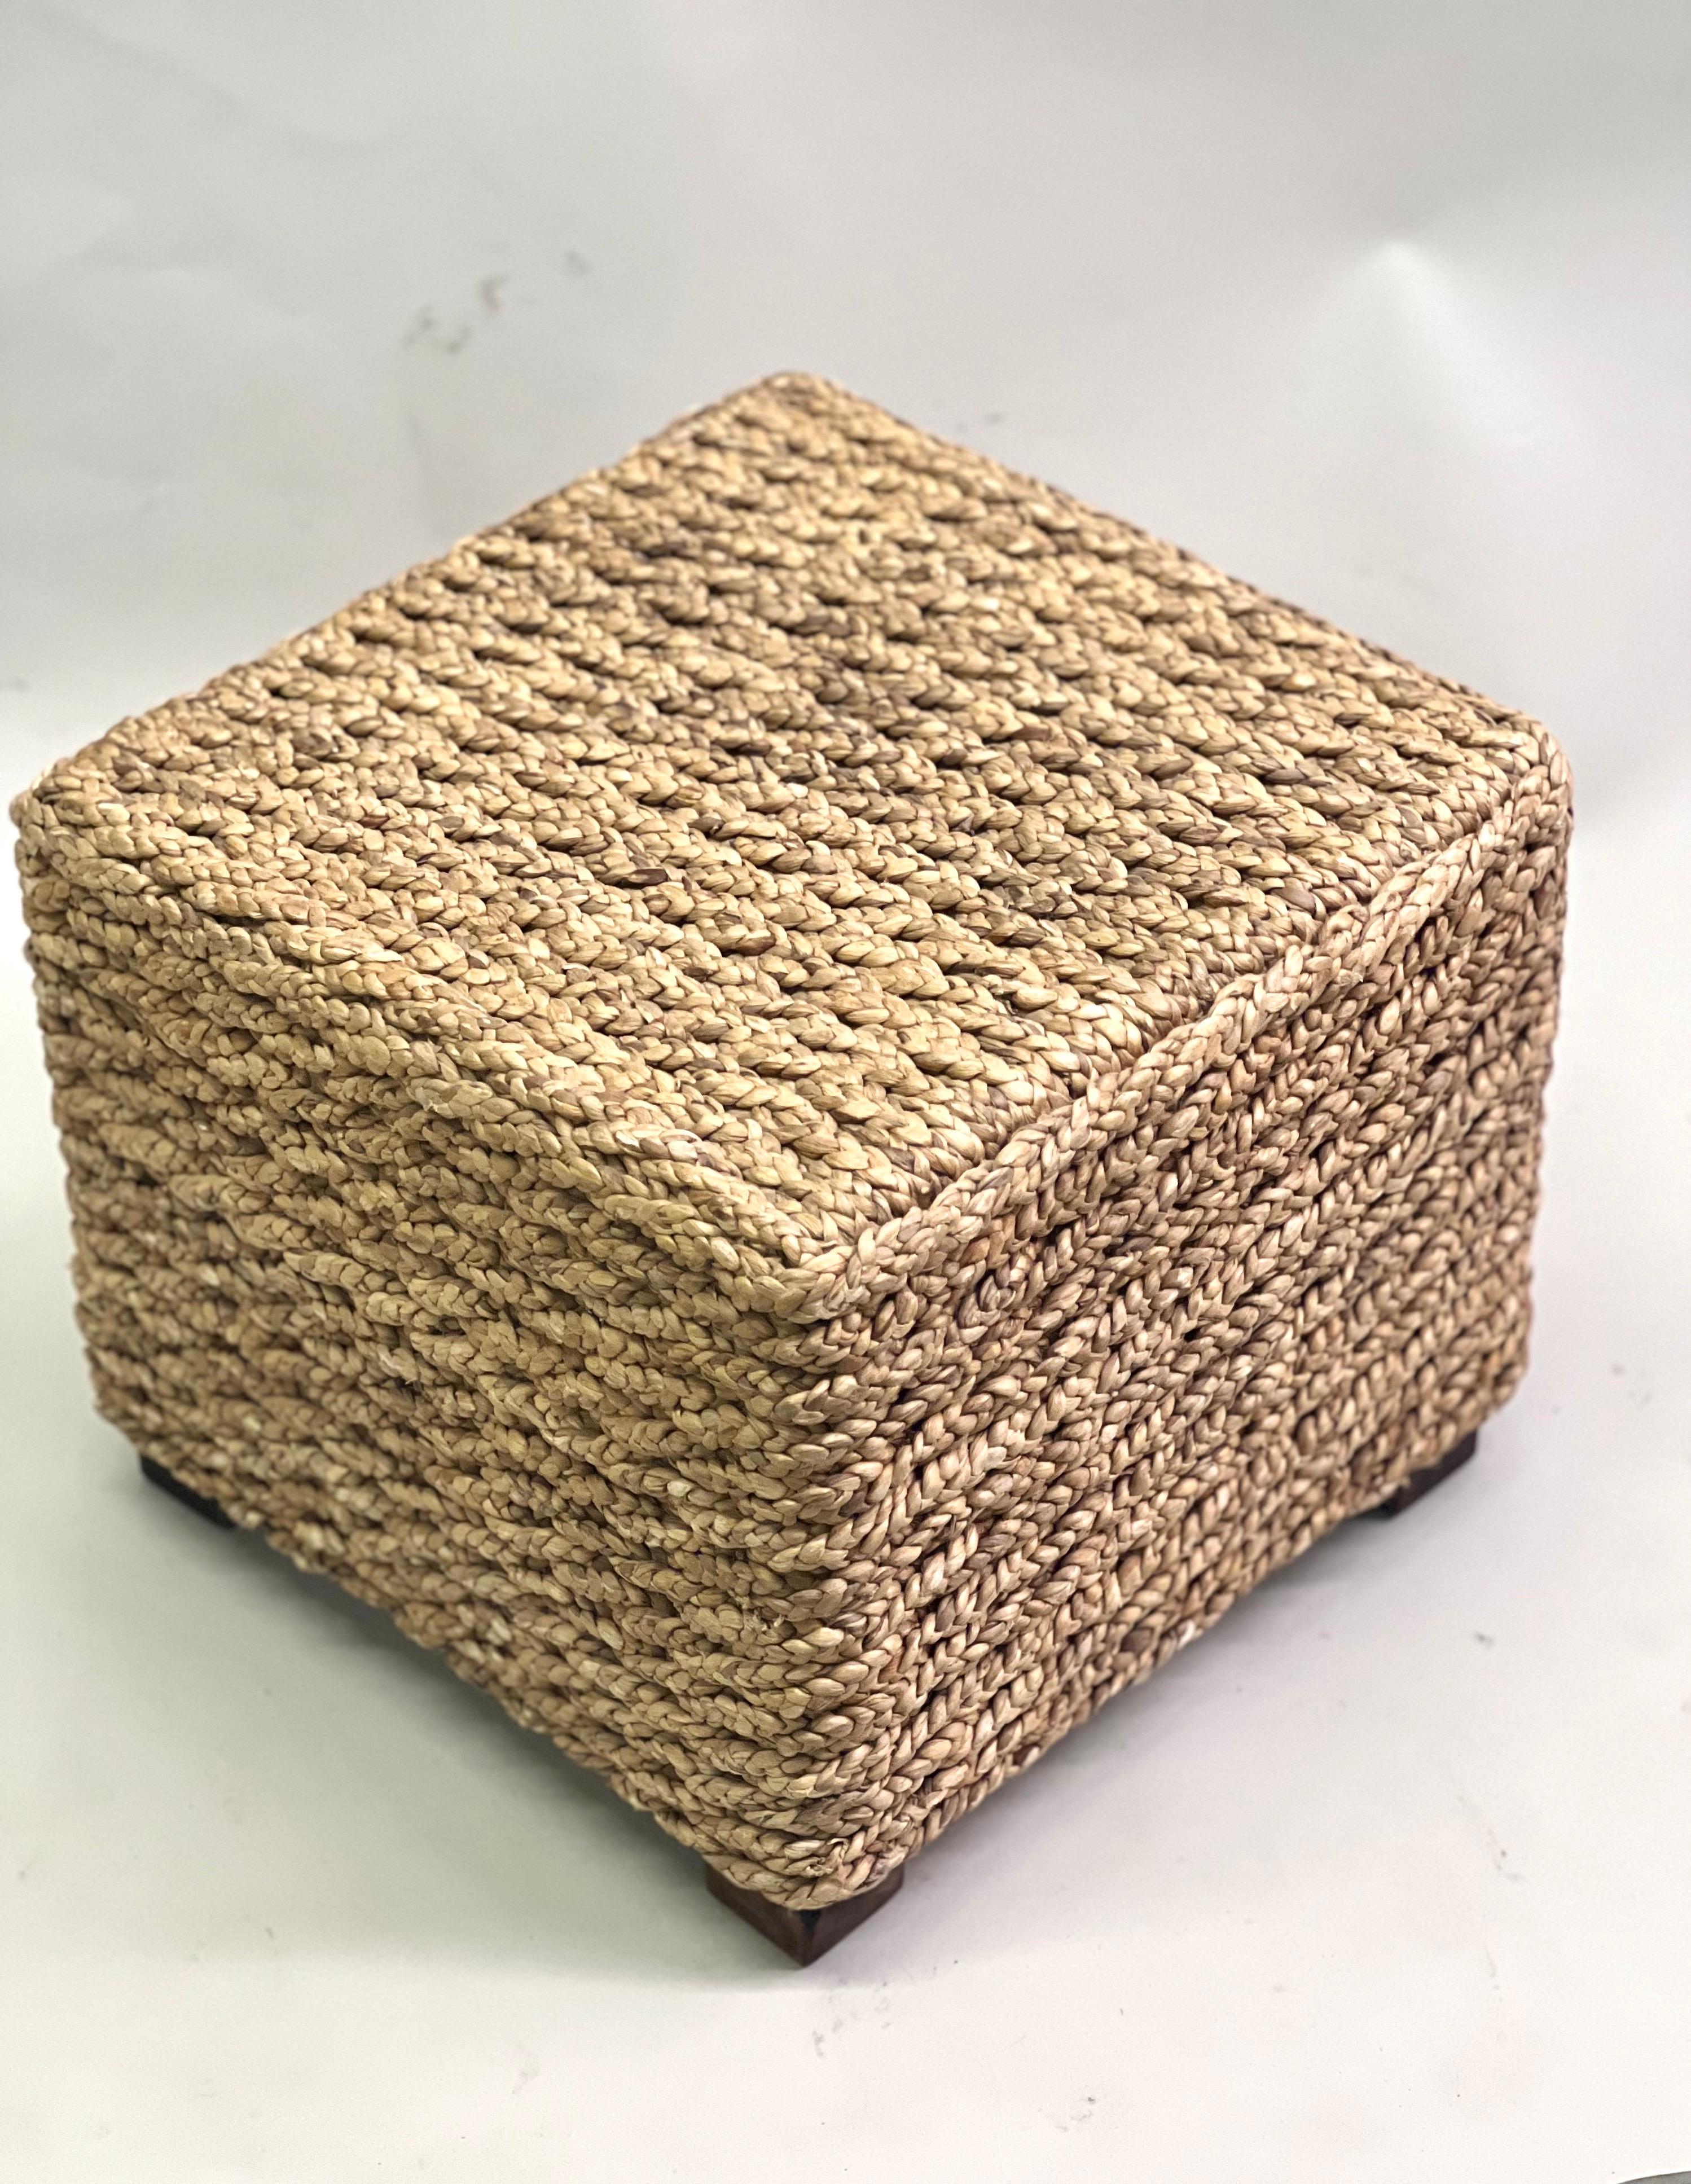 20th Century 1 French Mid-Century Rope Stool / Bench by Adrien Audoux & Frida Minet For Sale